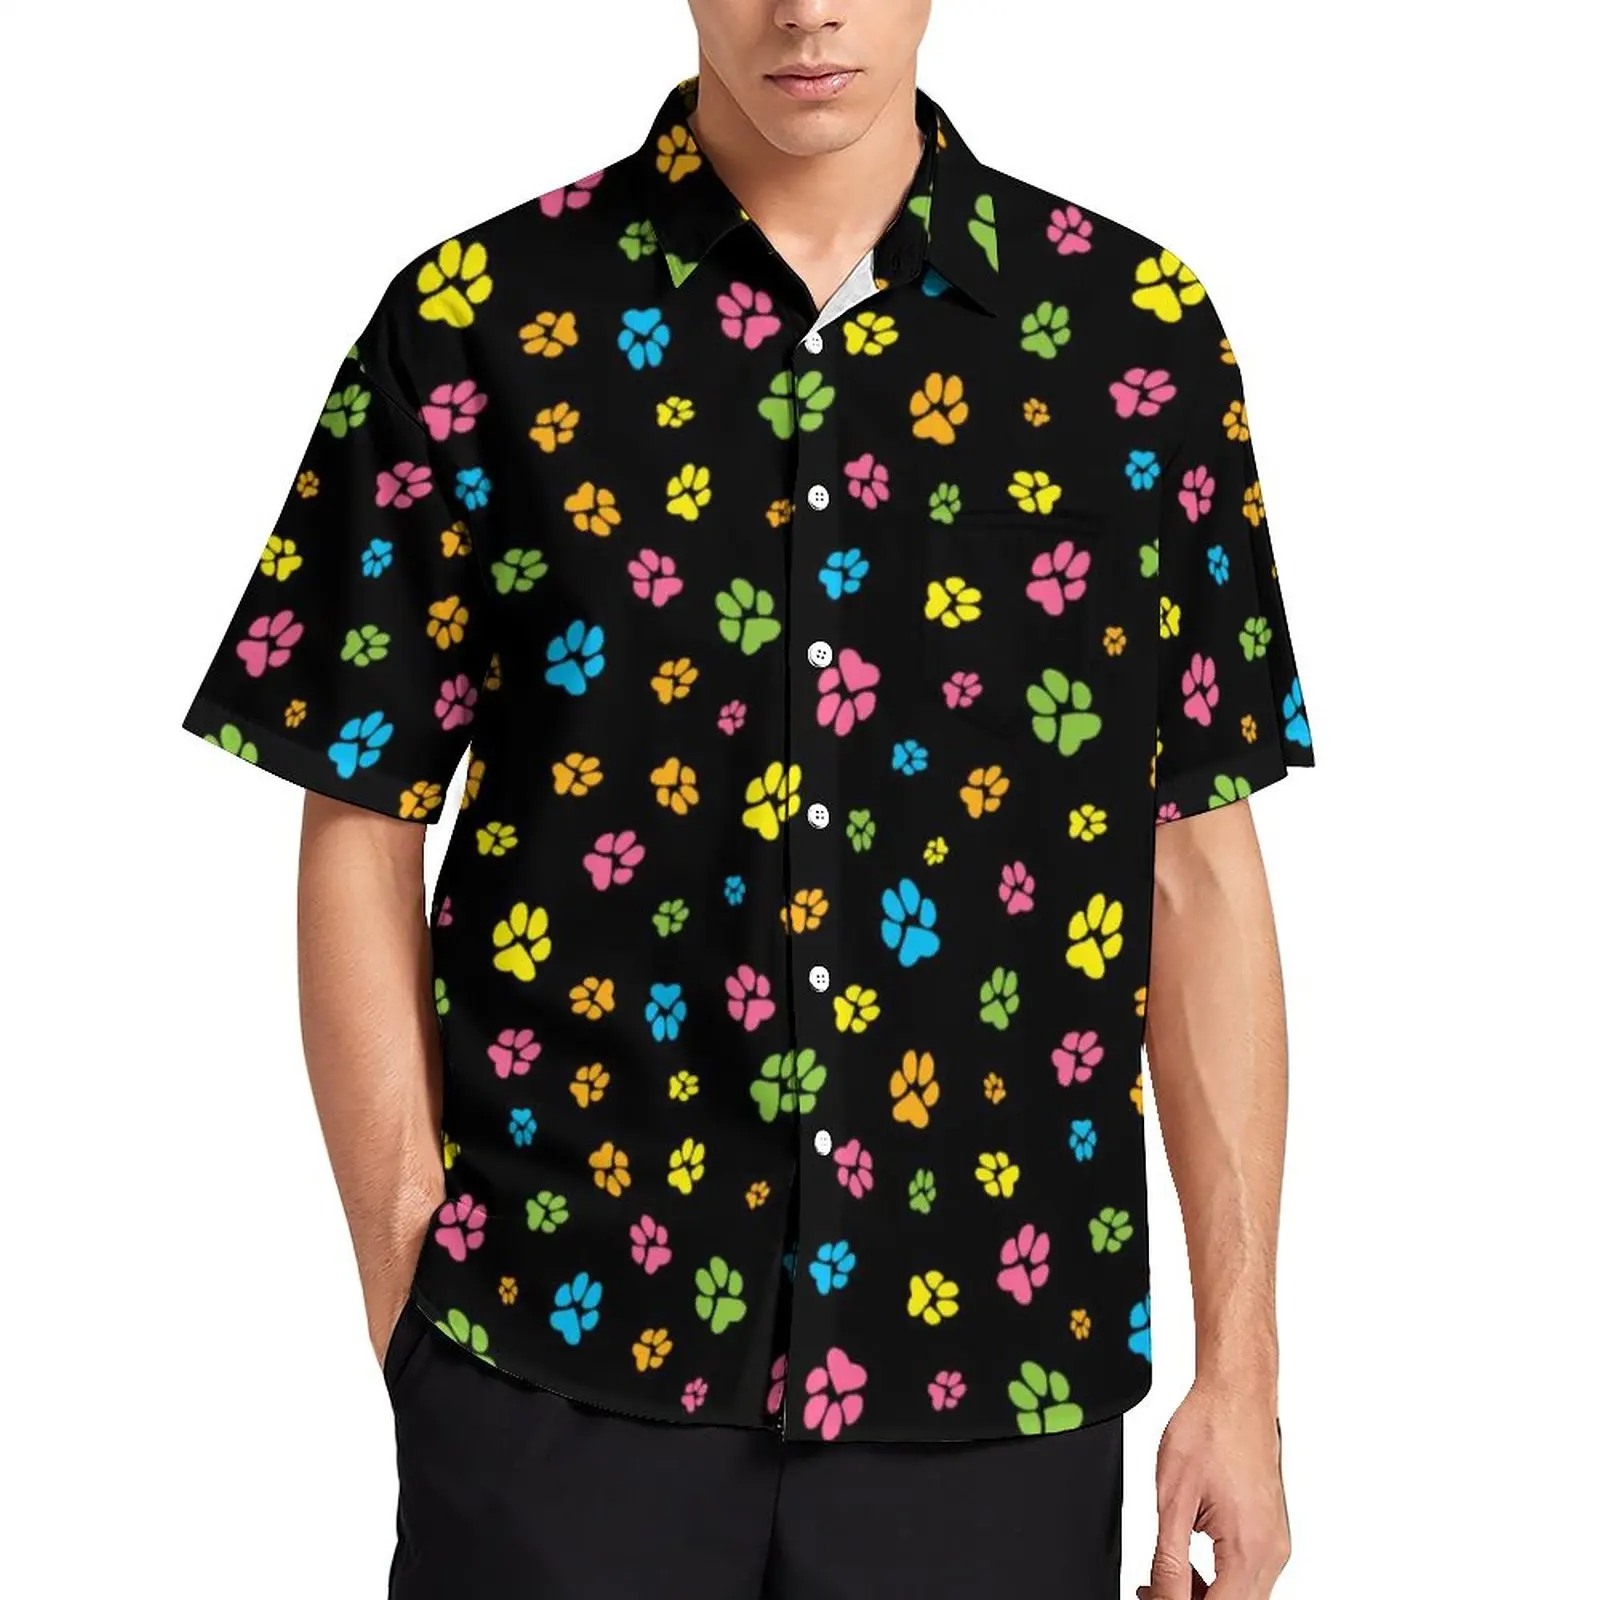 

Dog Paws Print Vacation Shirt Cute Colorful Hawaii Casual Shirts Man Street Style Blouses Graphic Clothing Plus Size 3XL 4XL